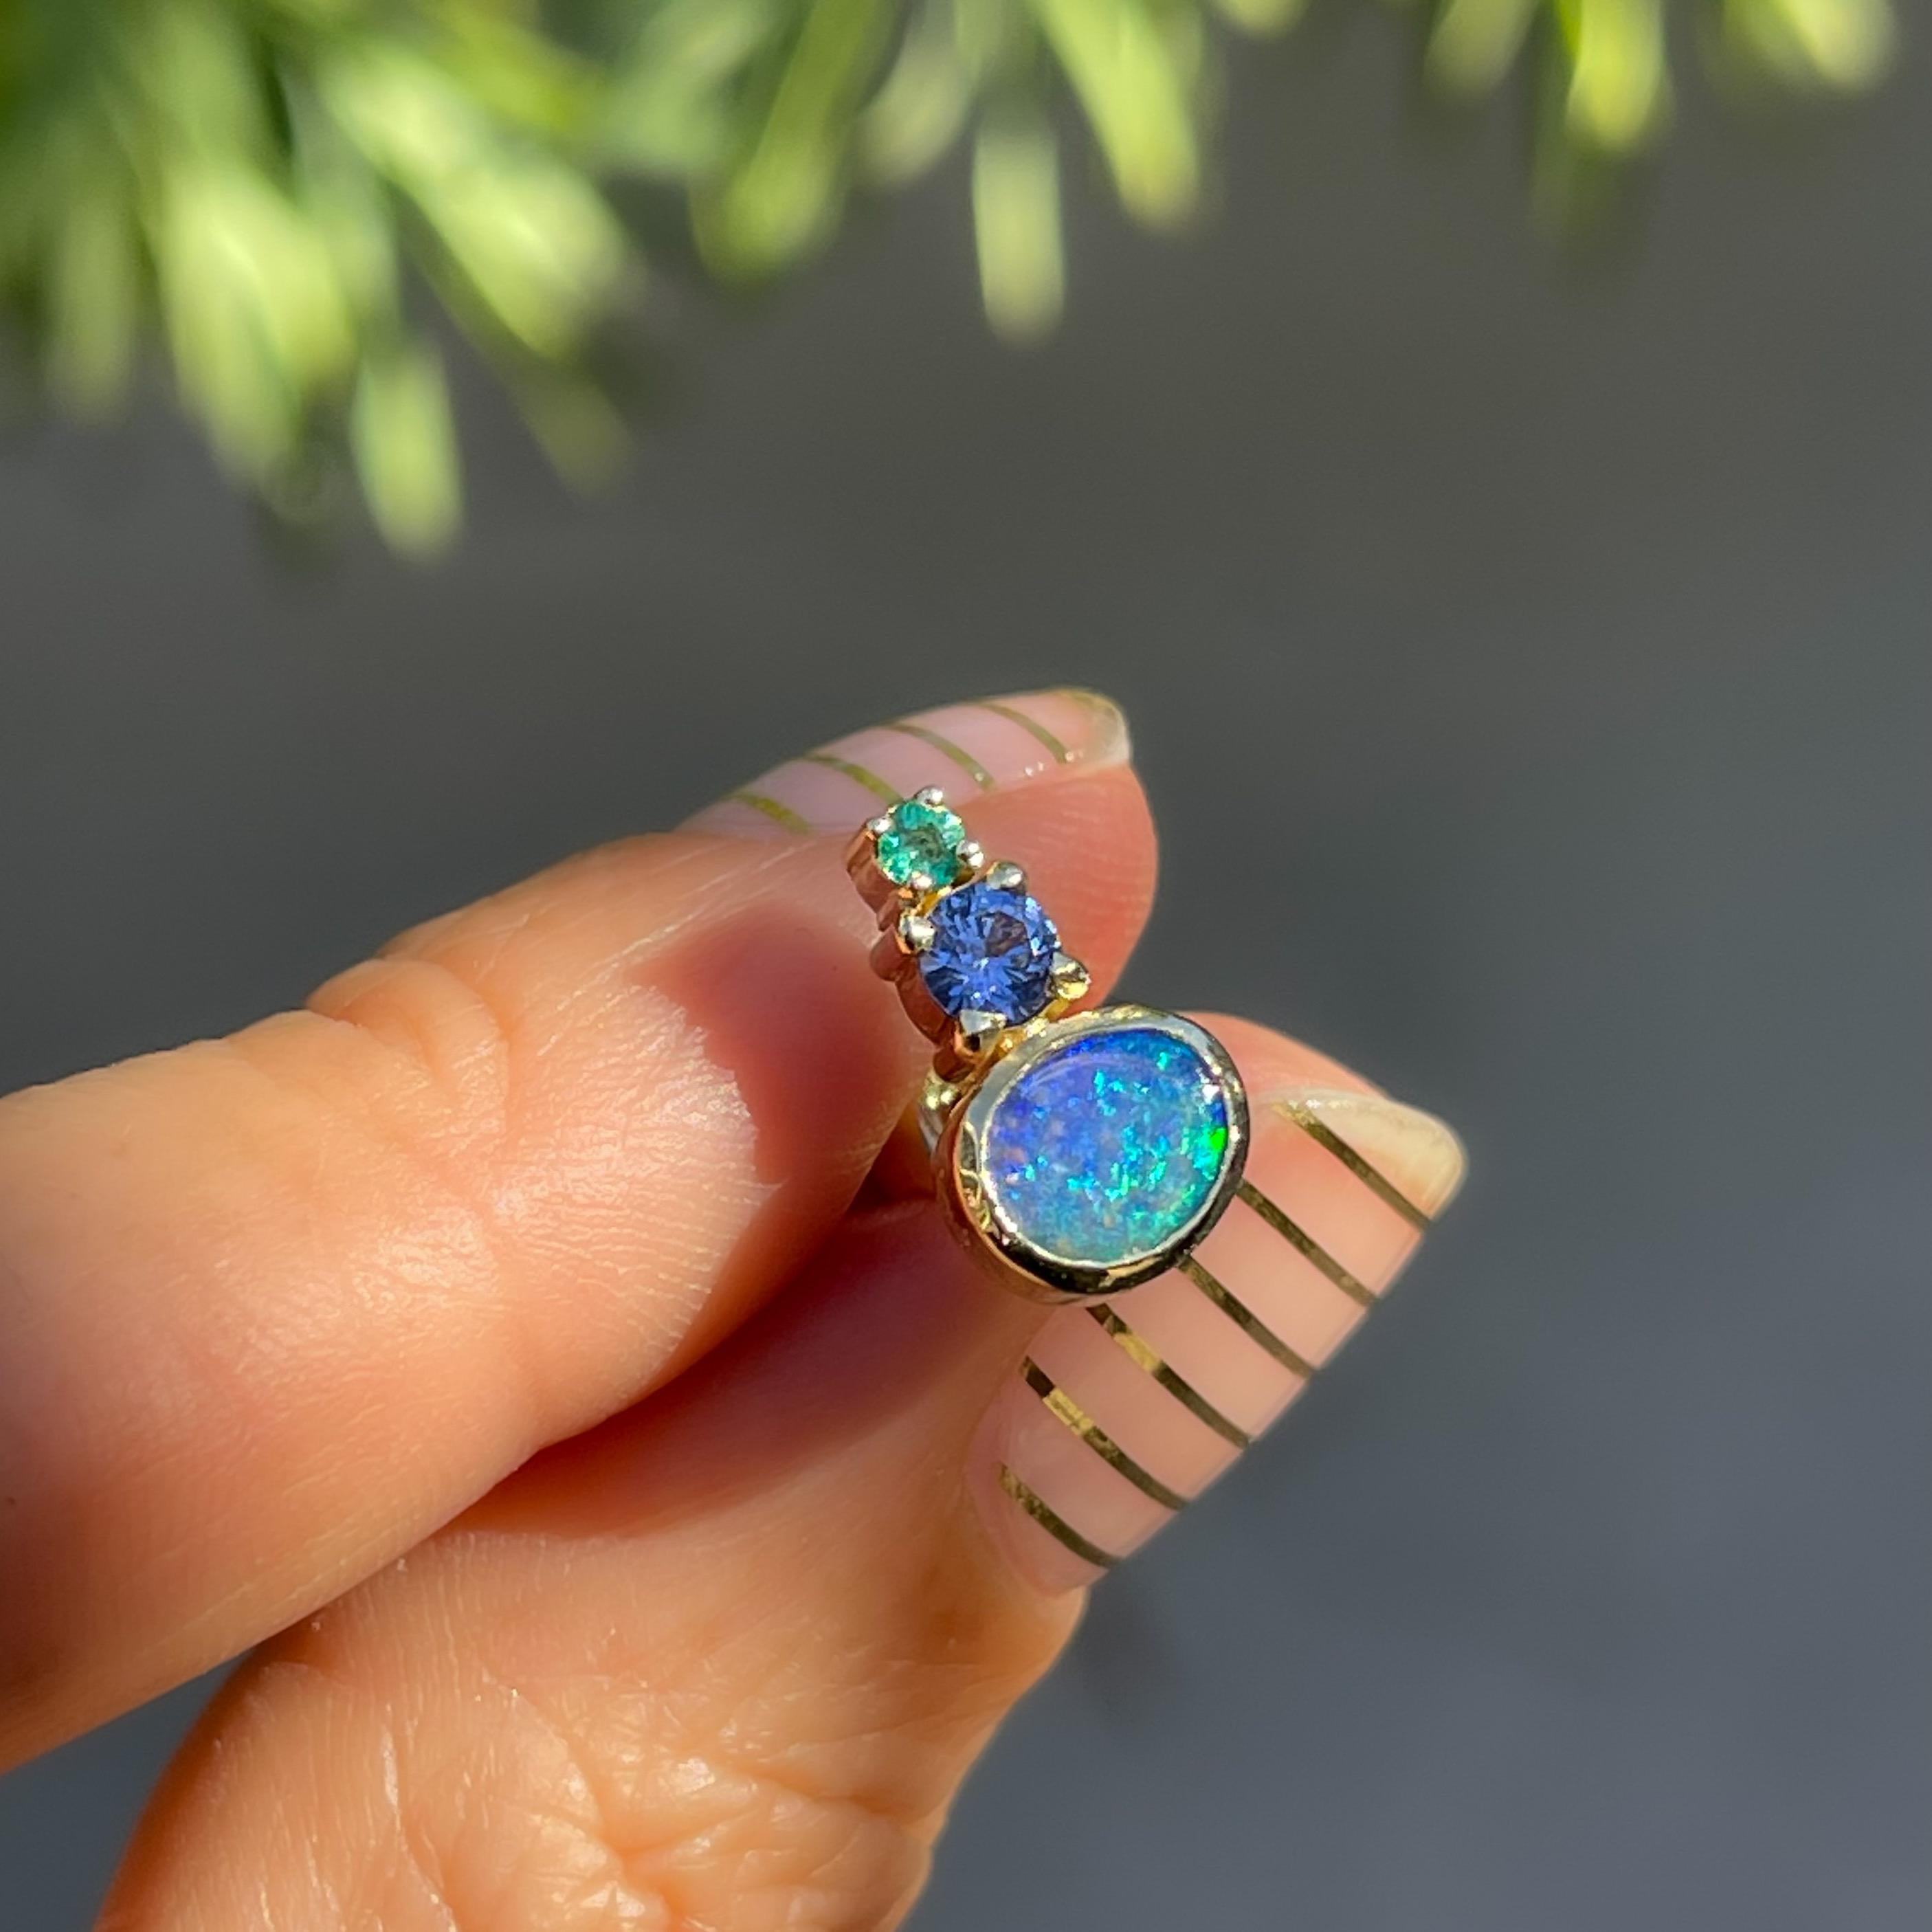 Brilliant Cut Bali Emerald and Opal Stud Earrings with Sapphire in Gold by NIXIN Jewelry For Sale